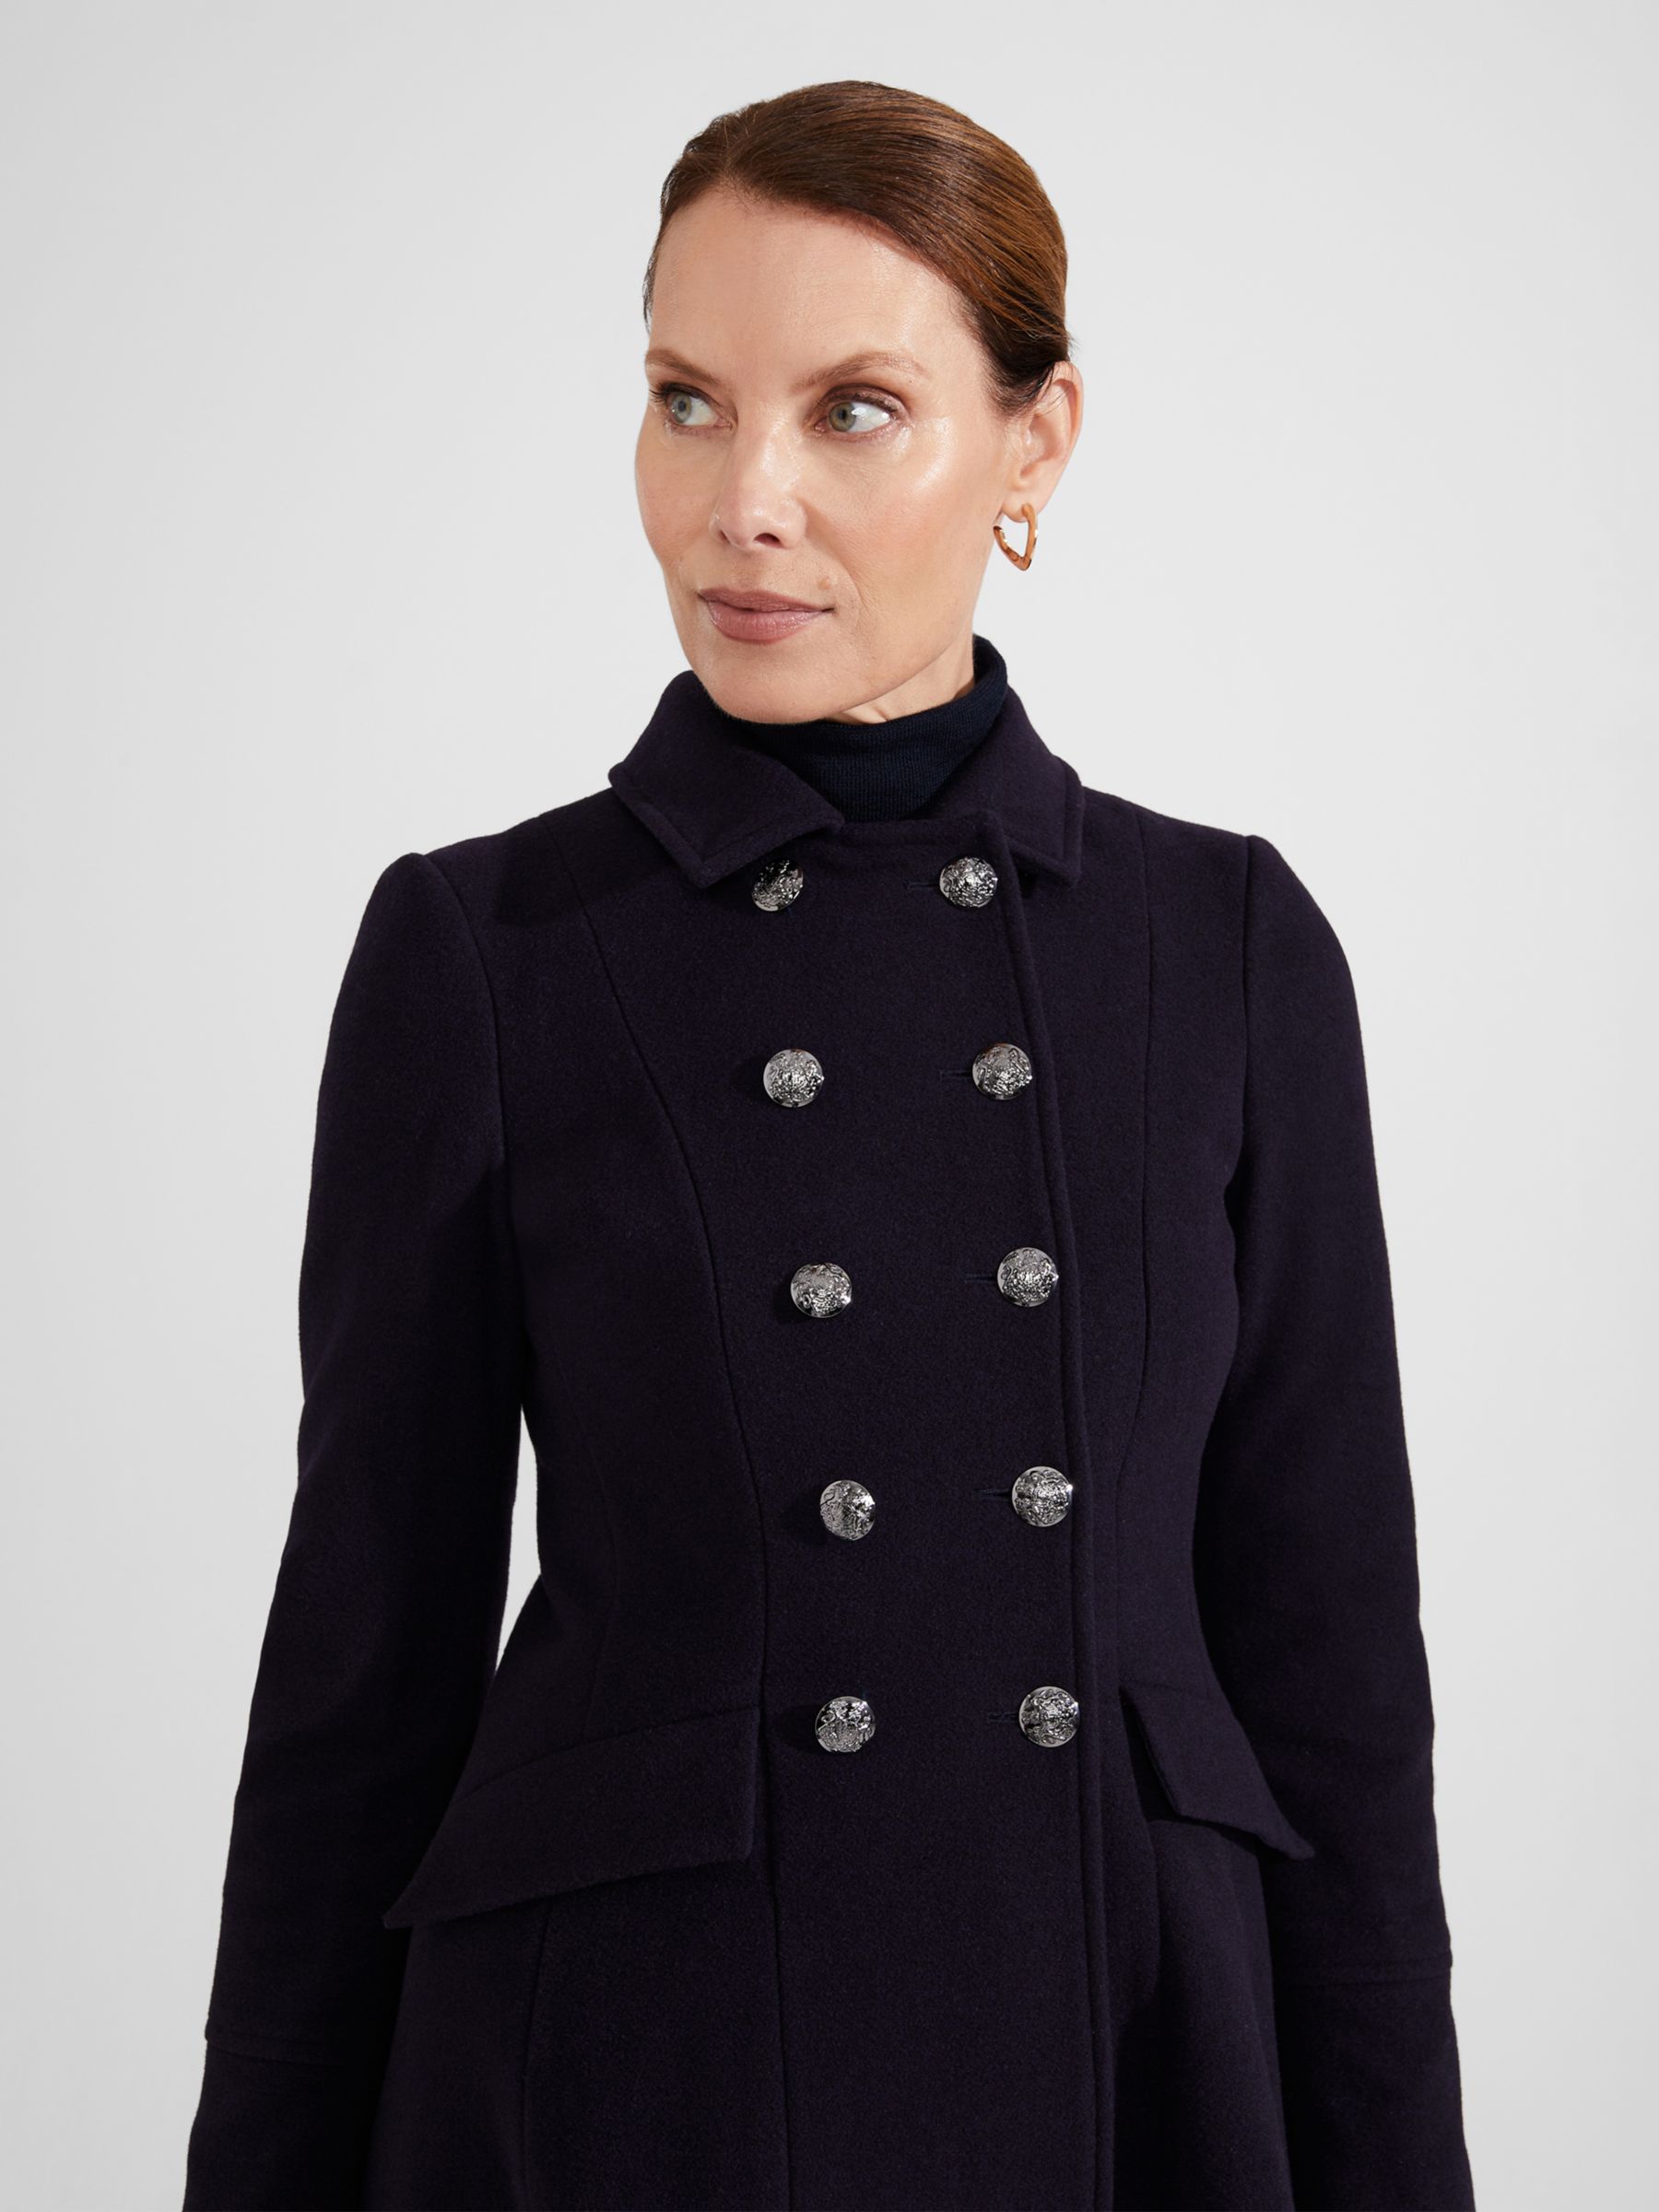 Hobbs Clarisse Wool and Cashmere Blend Coat, Navy at John Lewis & Partners